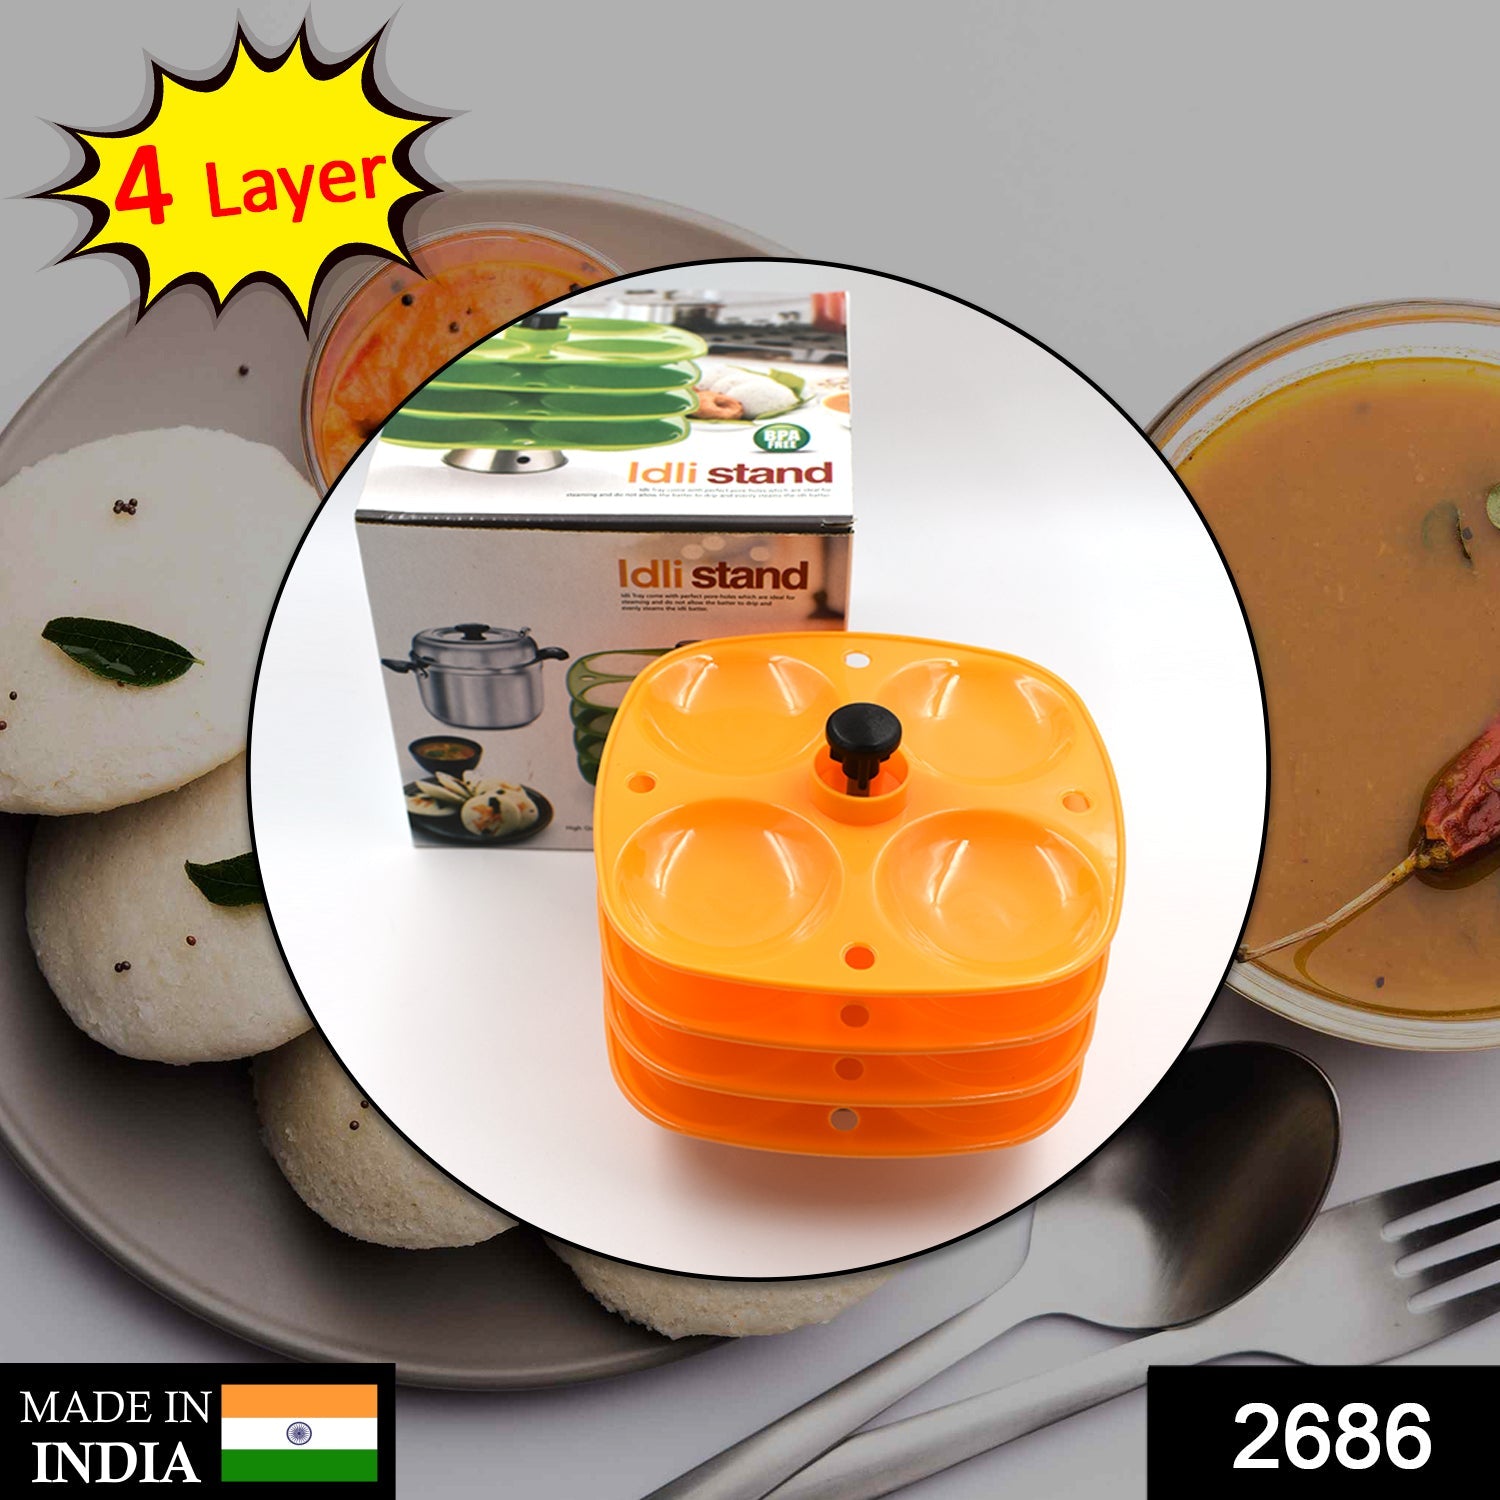 2686 4 Layer Idli Stand used in all kinds of household kitchen purposes for holding and serving idlis.